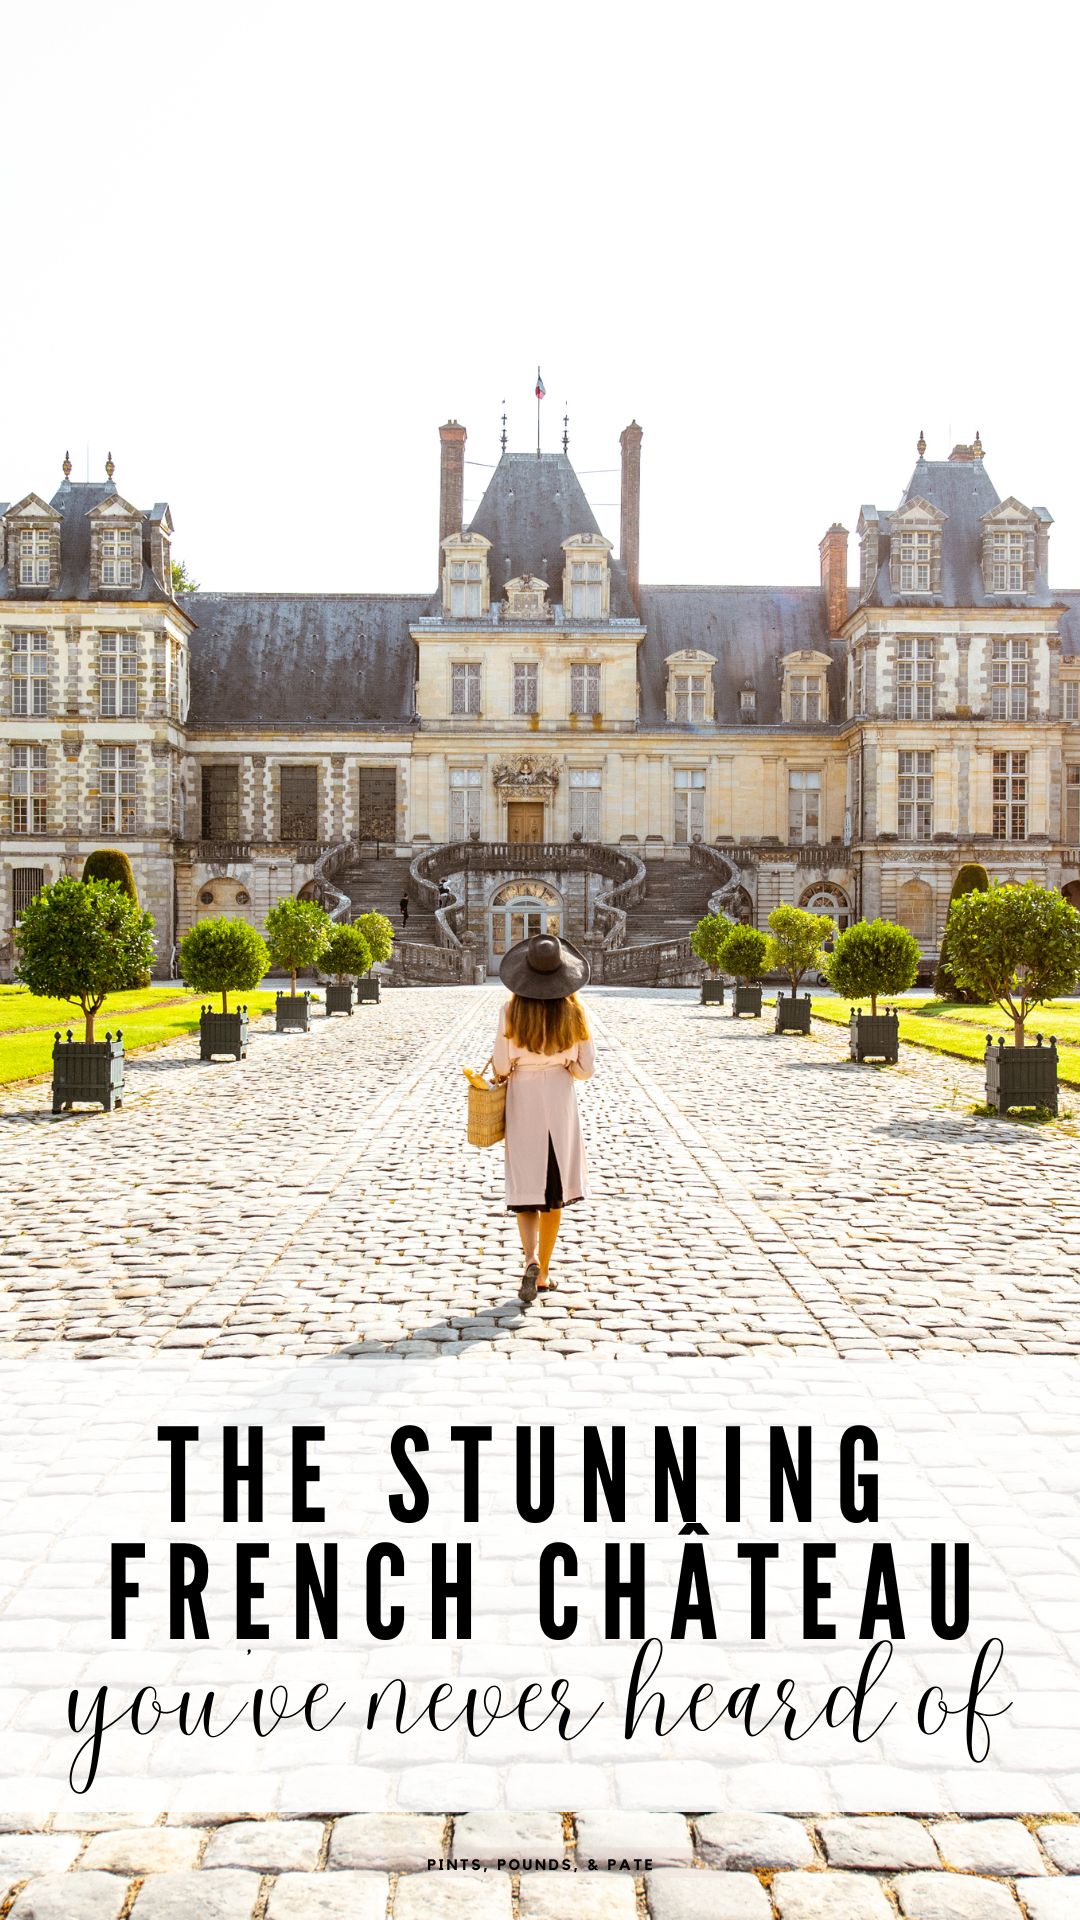 A Day Trip to the Chateau de Fontainebleau